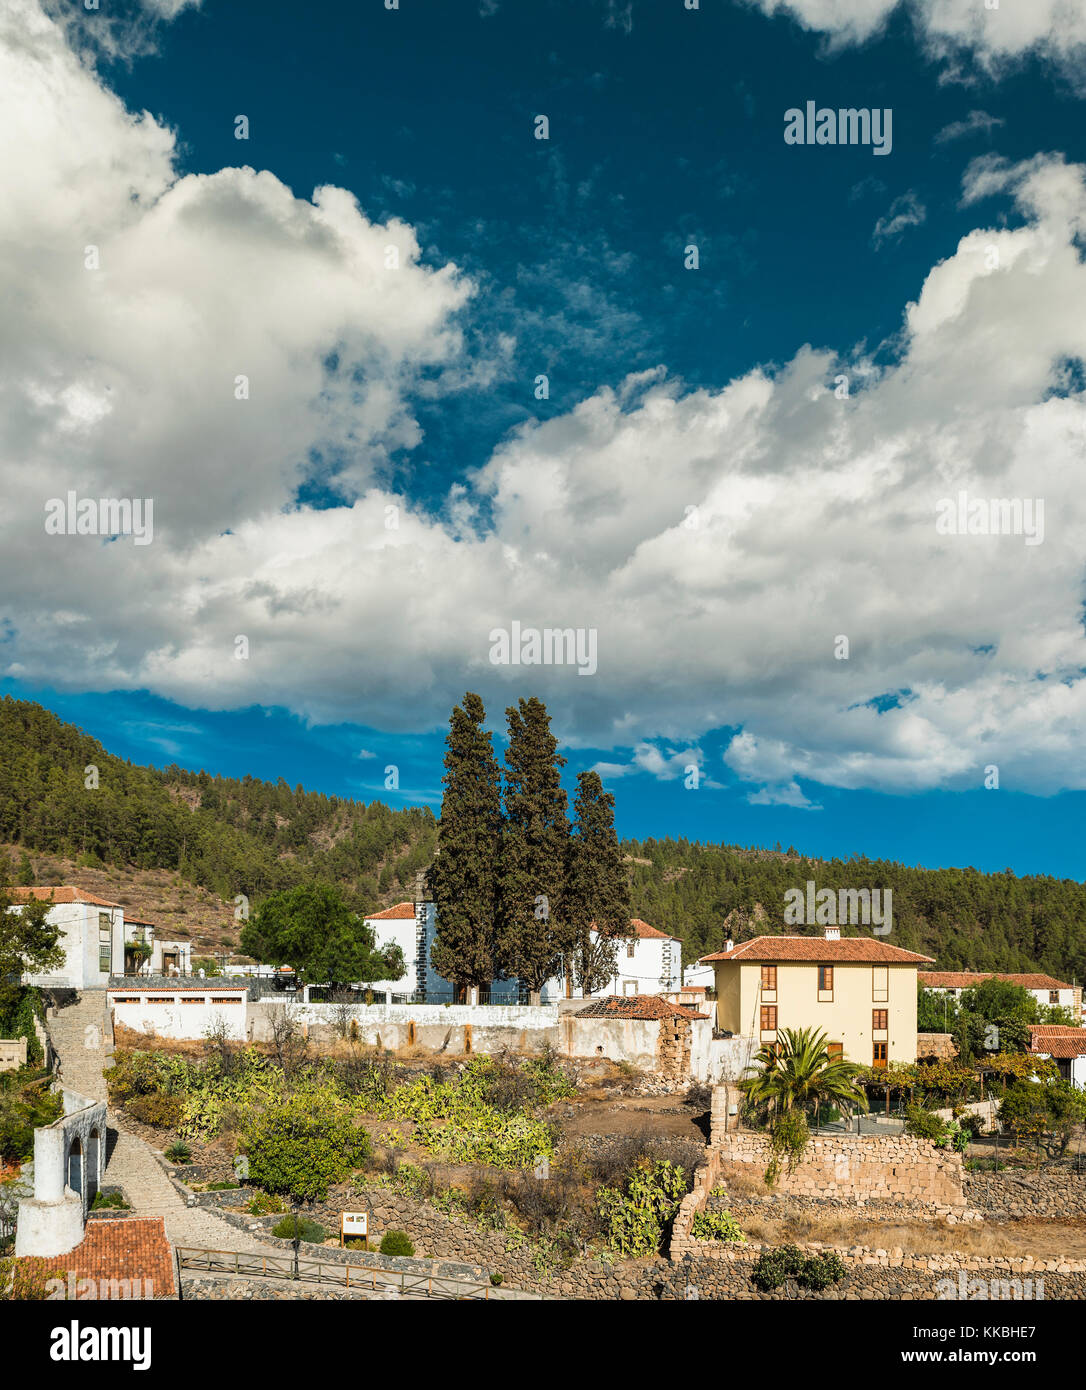 View over the mountain village of Vilaflor towards the Atlantic Ocean, a popular tourist destination on the island of Tenerife, Canary Islands, Spain Stock Photo